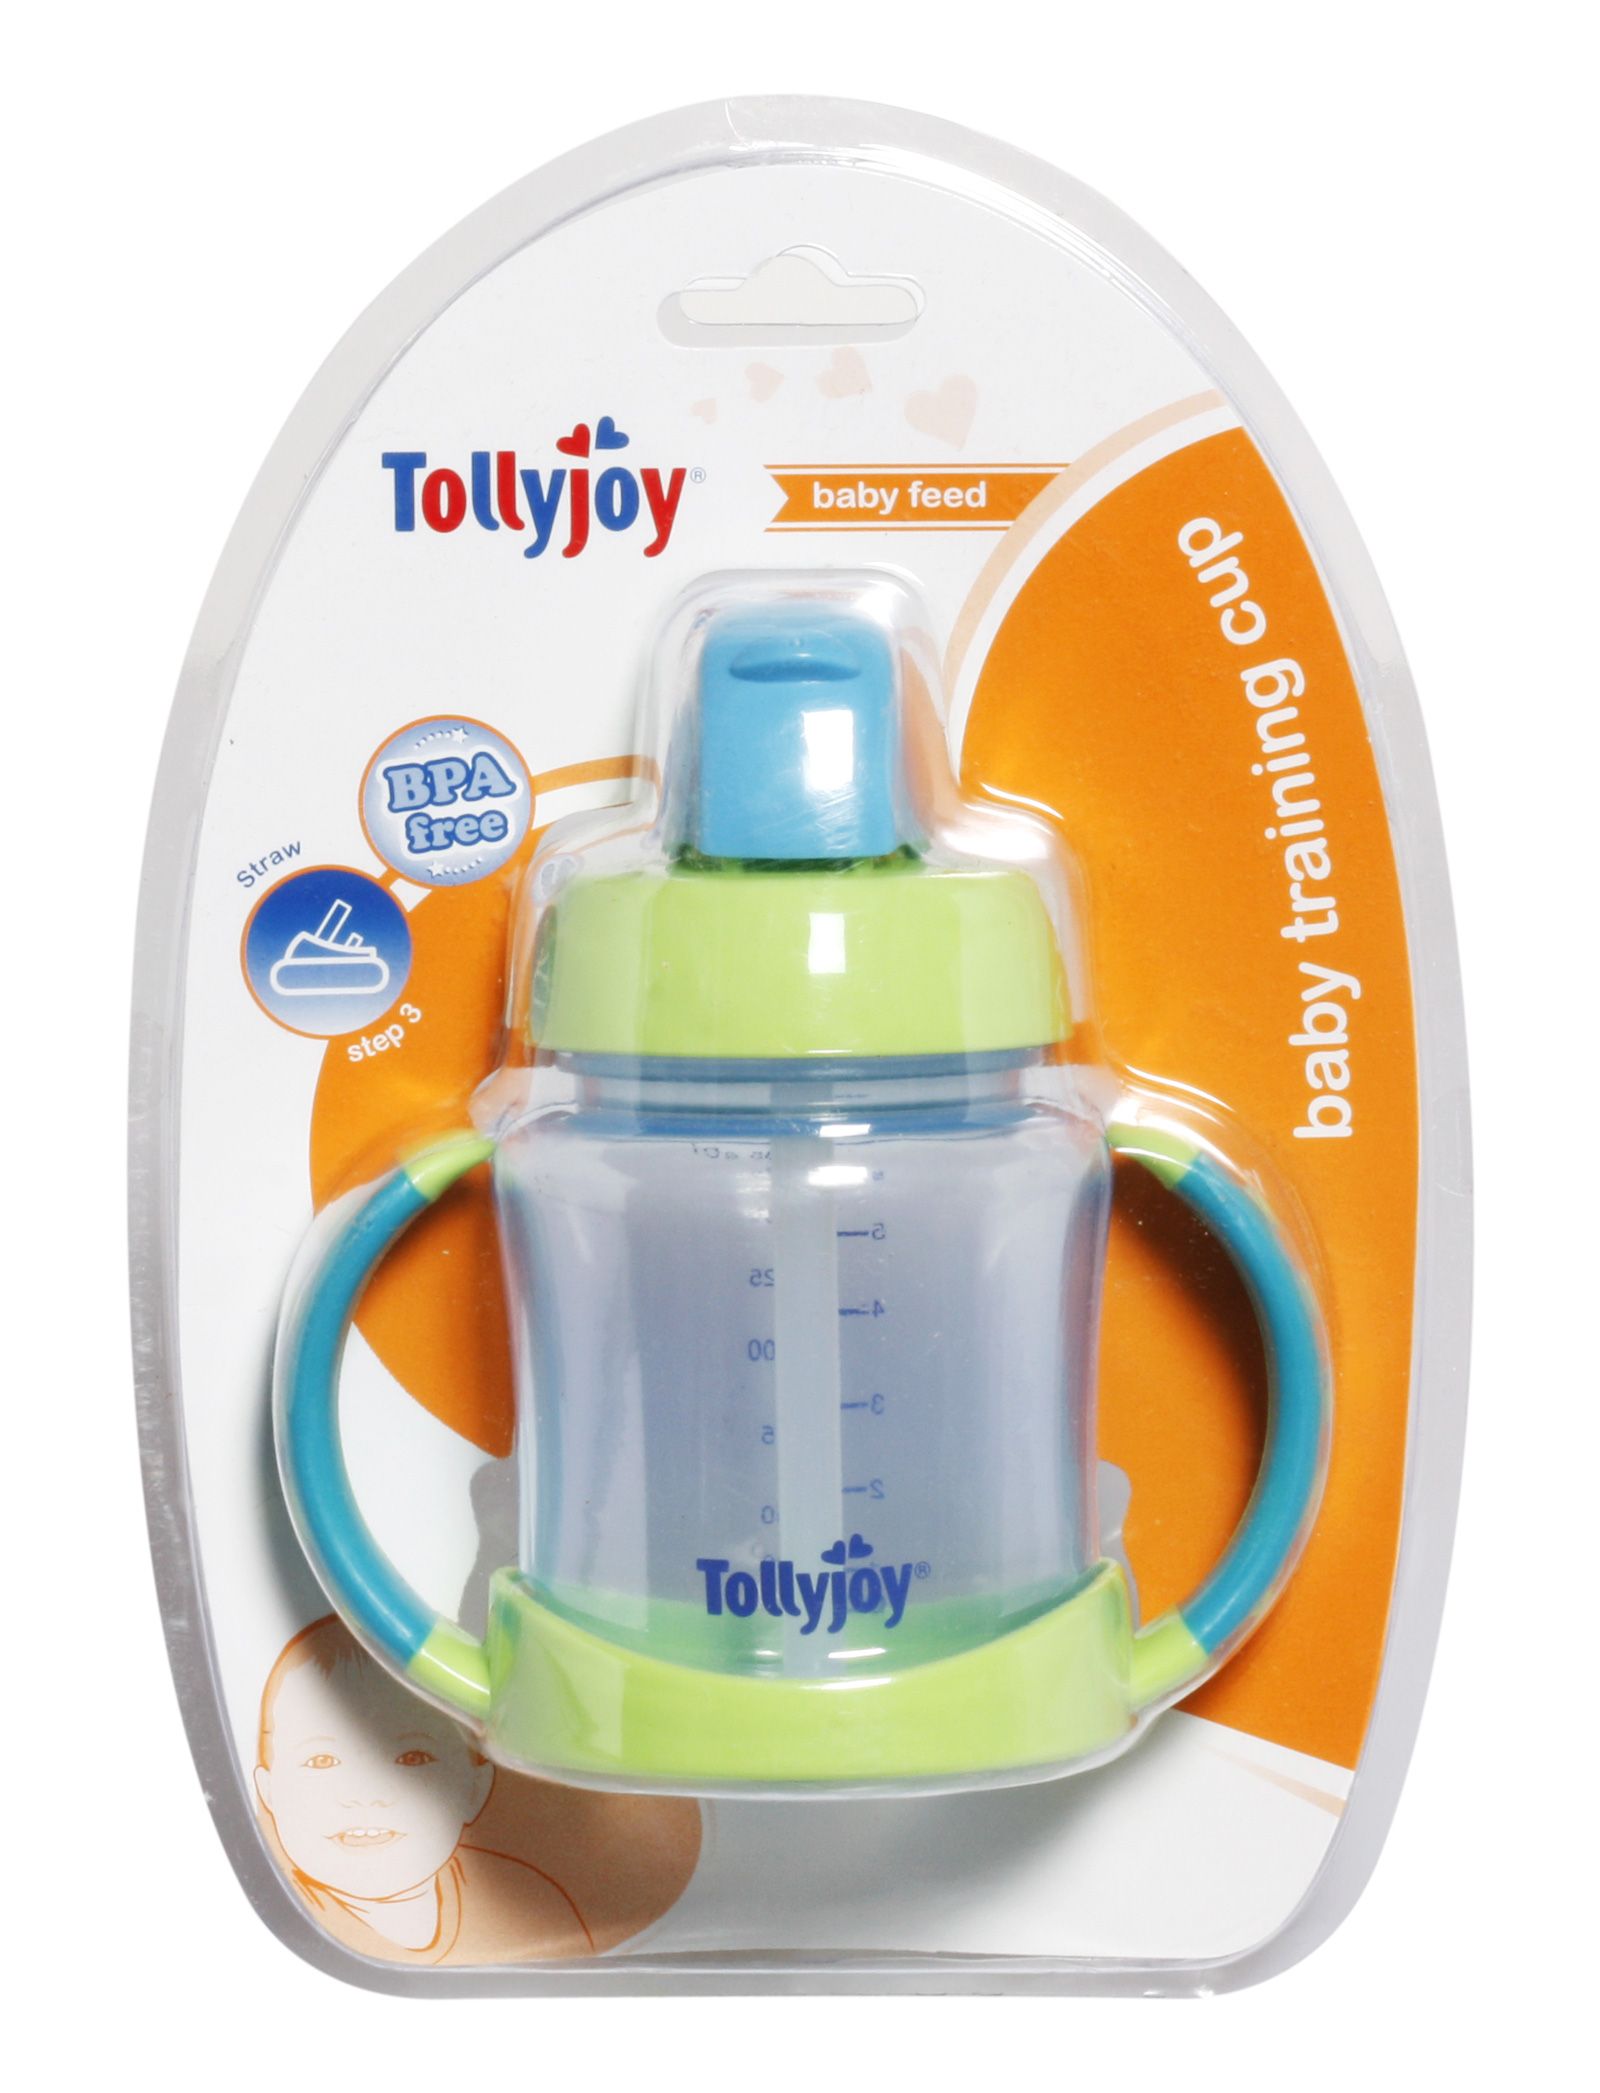 Tollyjoy - Straw Training Cup 2 in 1